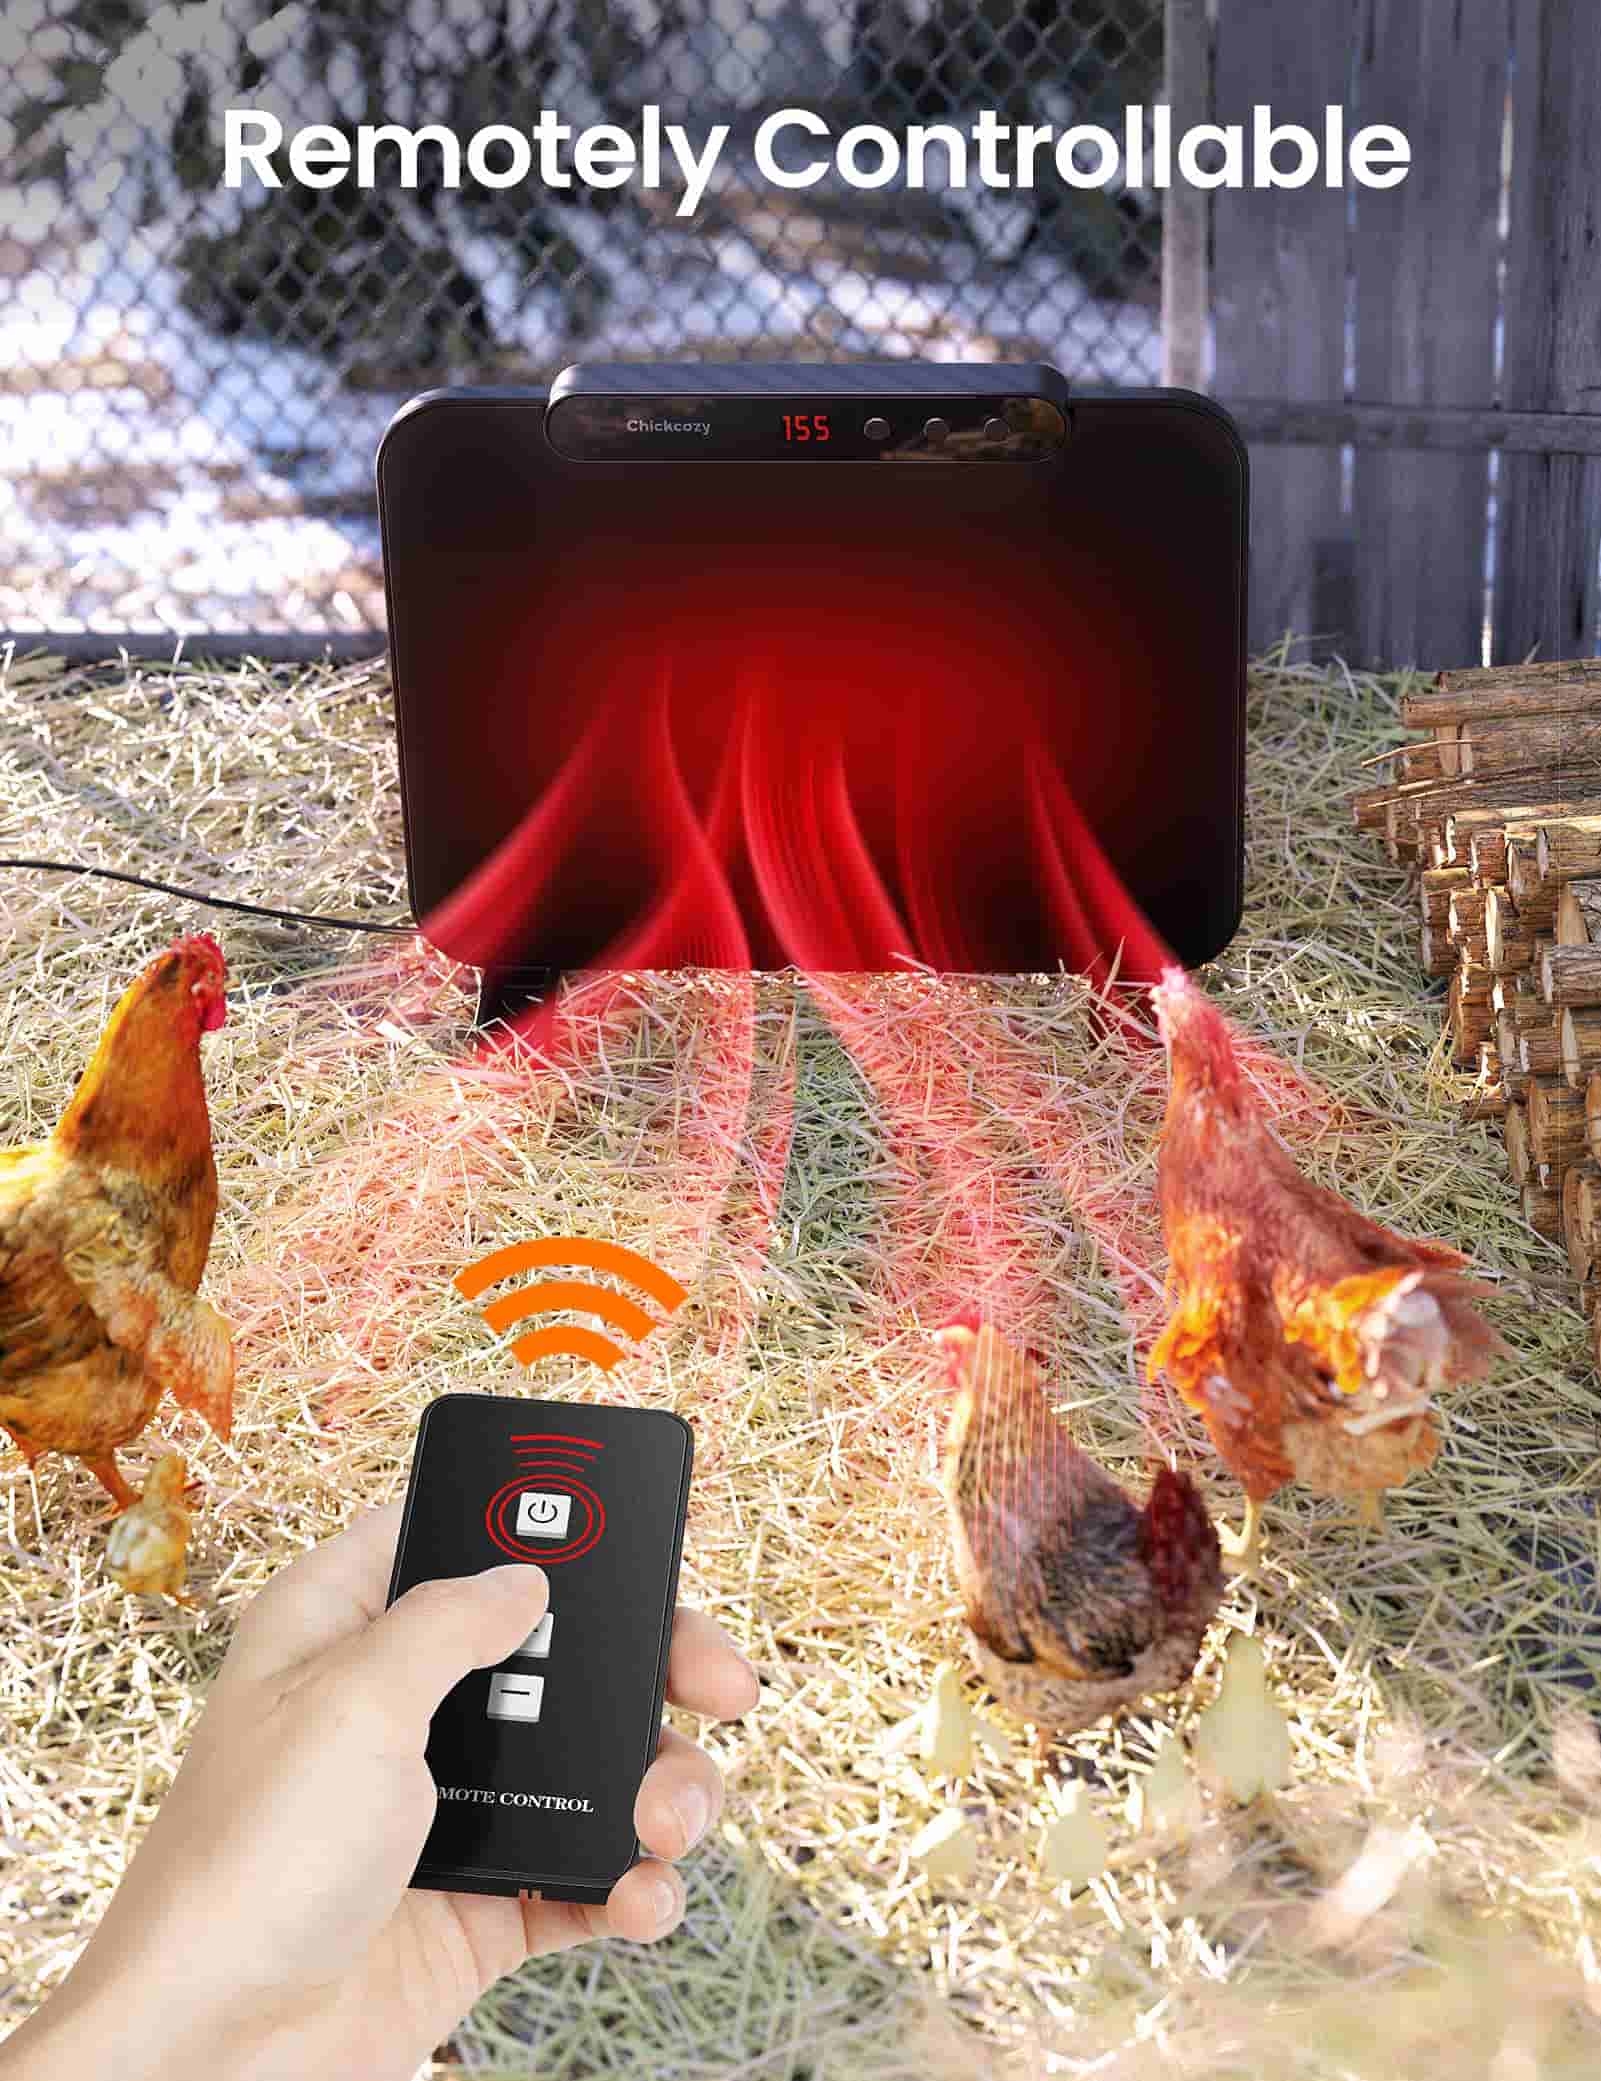 Chicken coop heater with a remote control feature